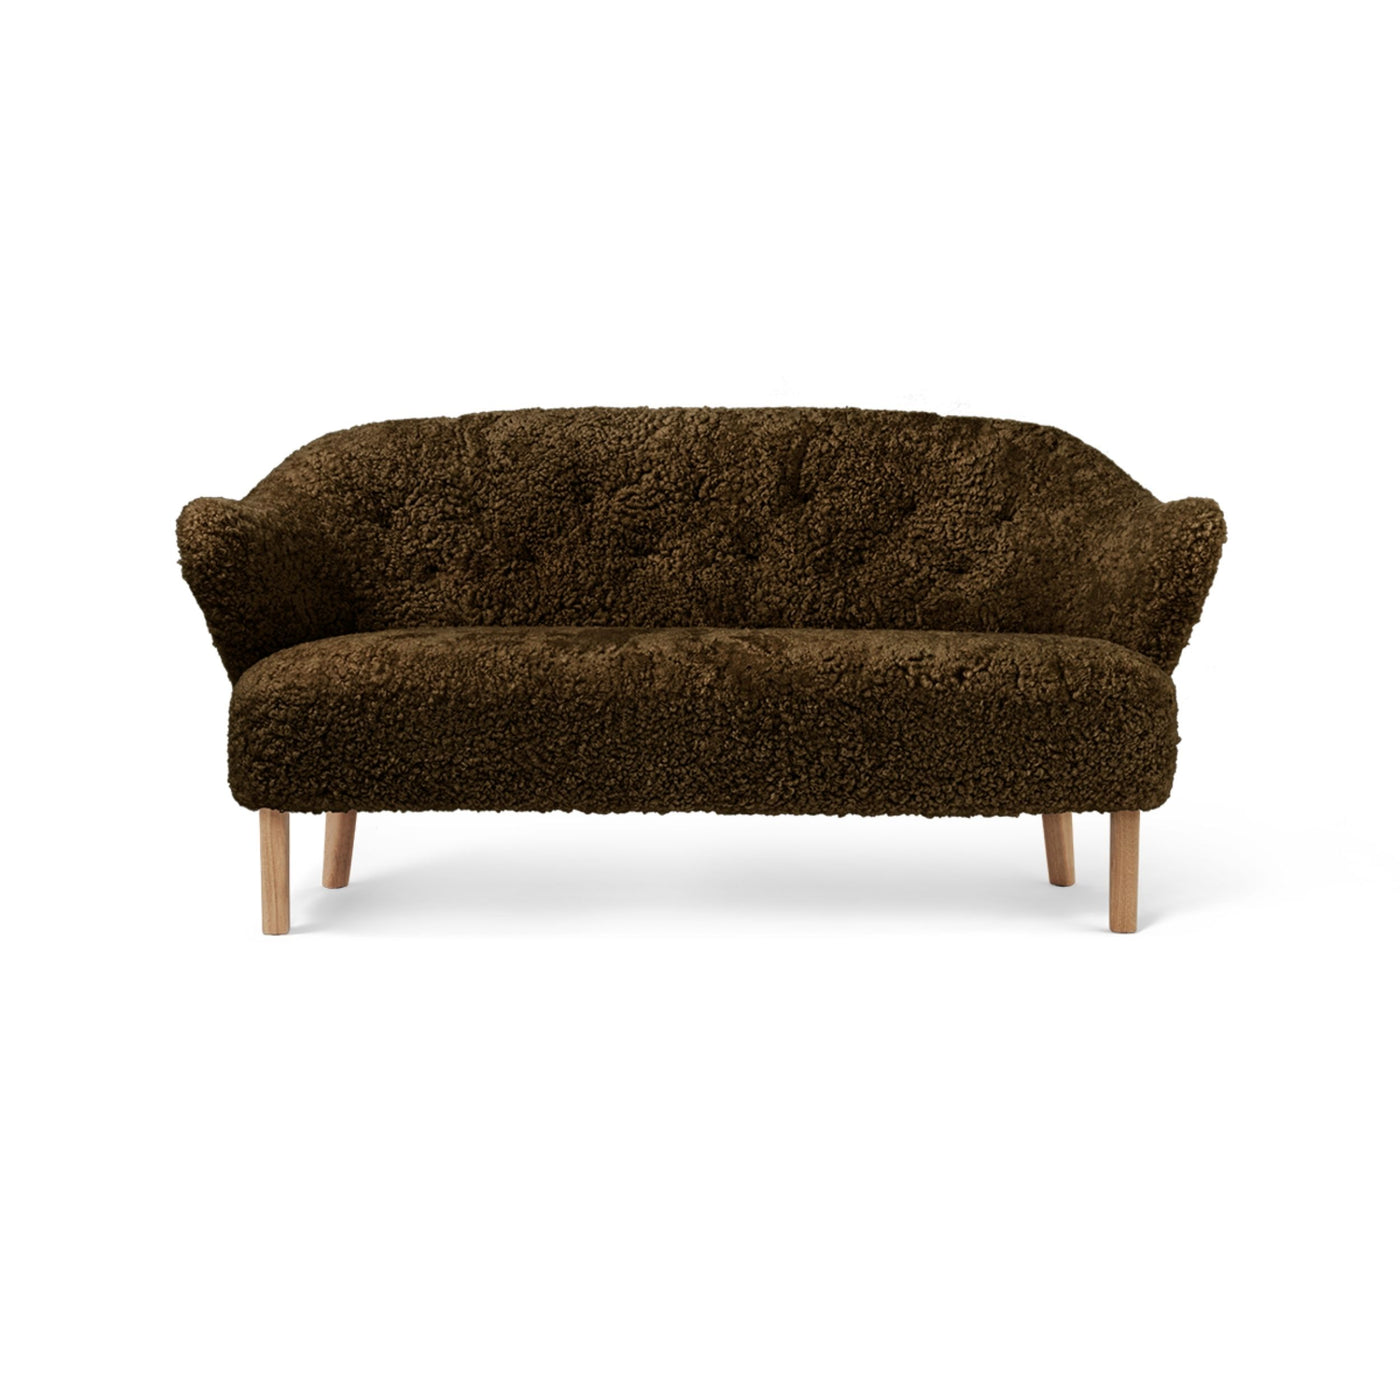 By Lassen Ingeborg sofa with natural oak legs. Made to order from someday designs. #colour_sheepskin-espresso